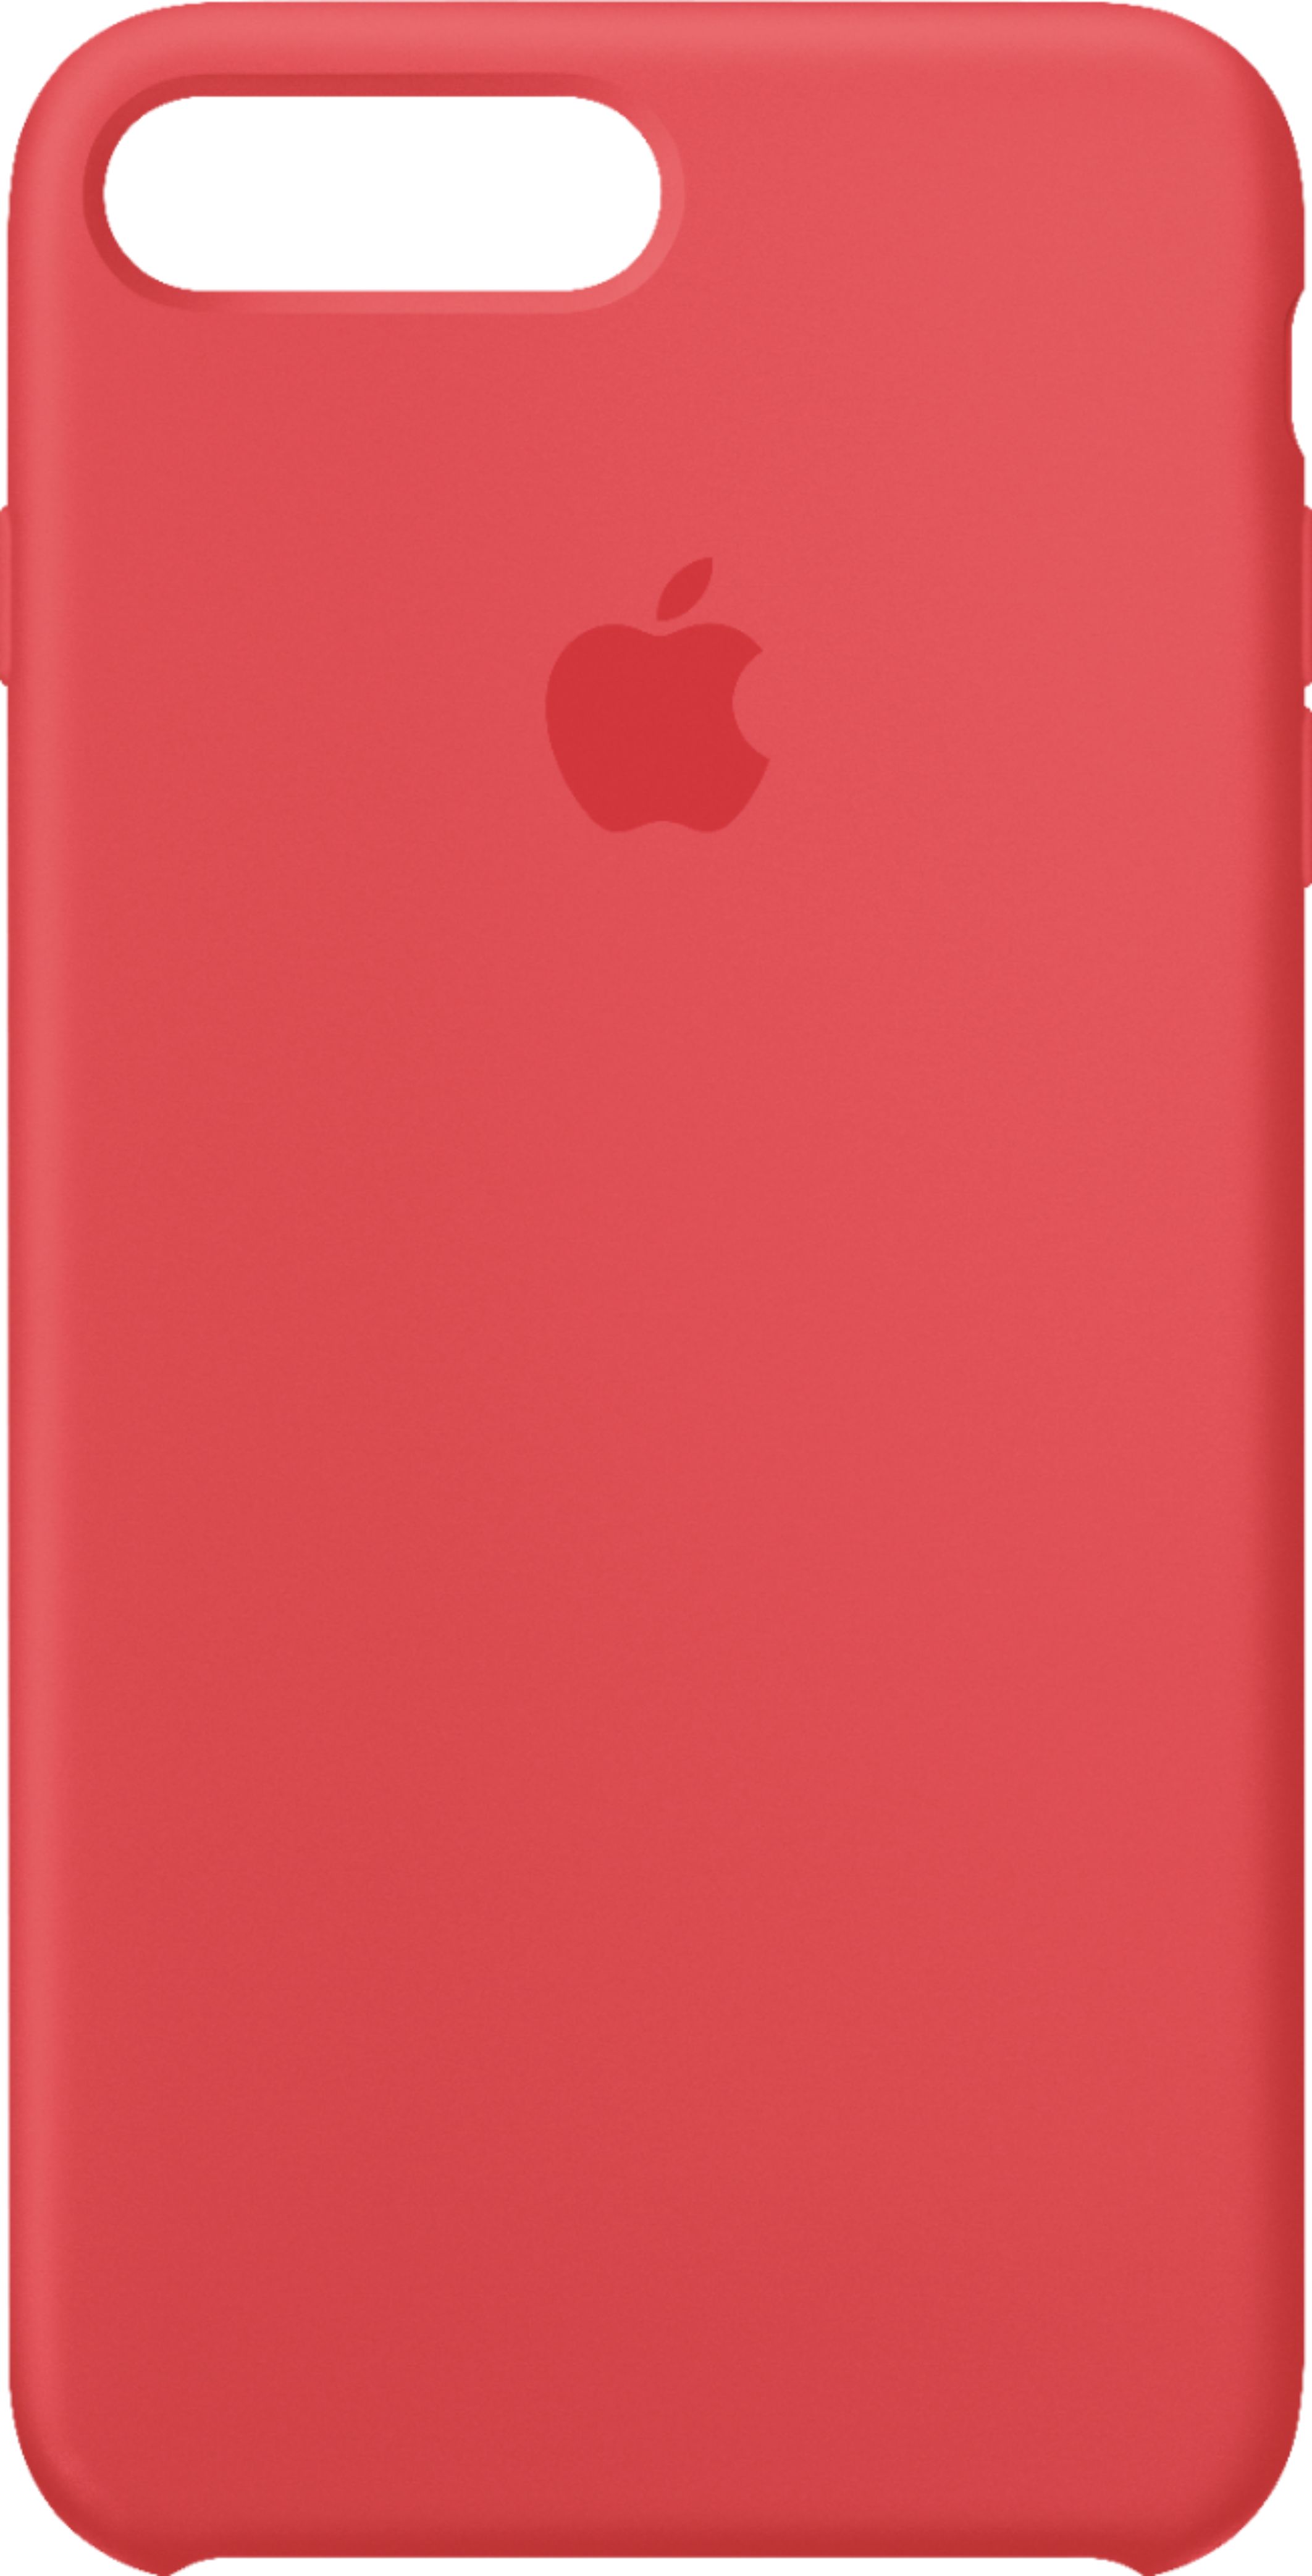 Case Silicone Best iPhone® Buy Red MRFW2ZM/A Plus Apple Plus/7 Raspberry 8 -